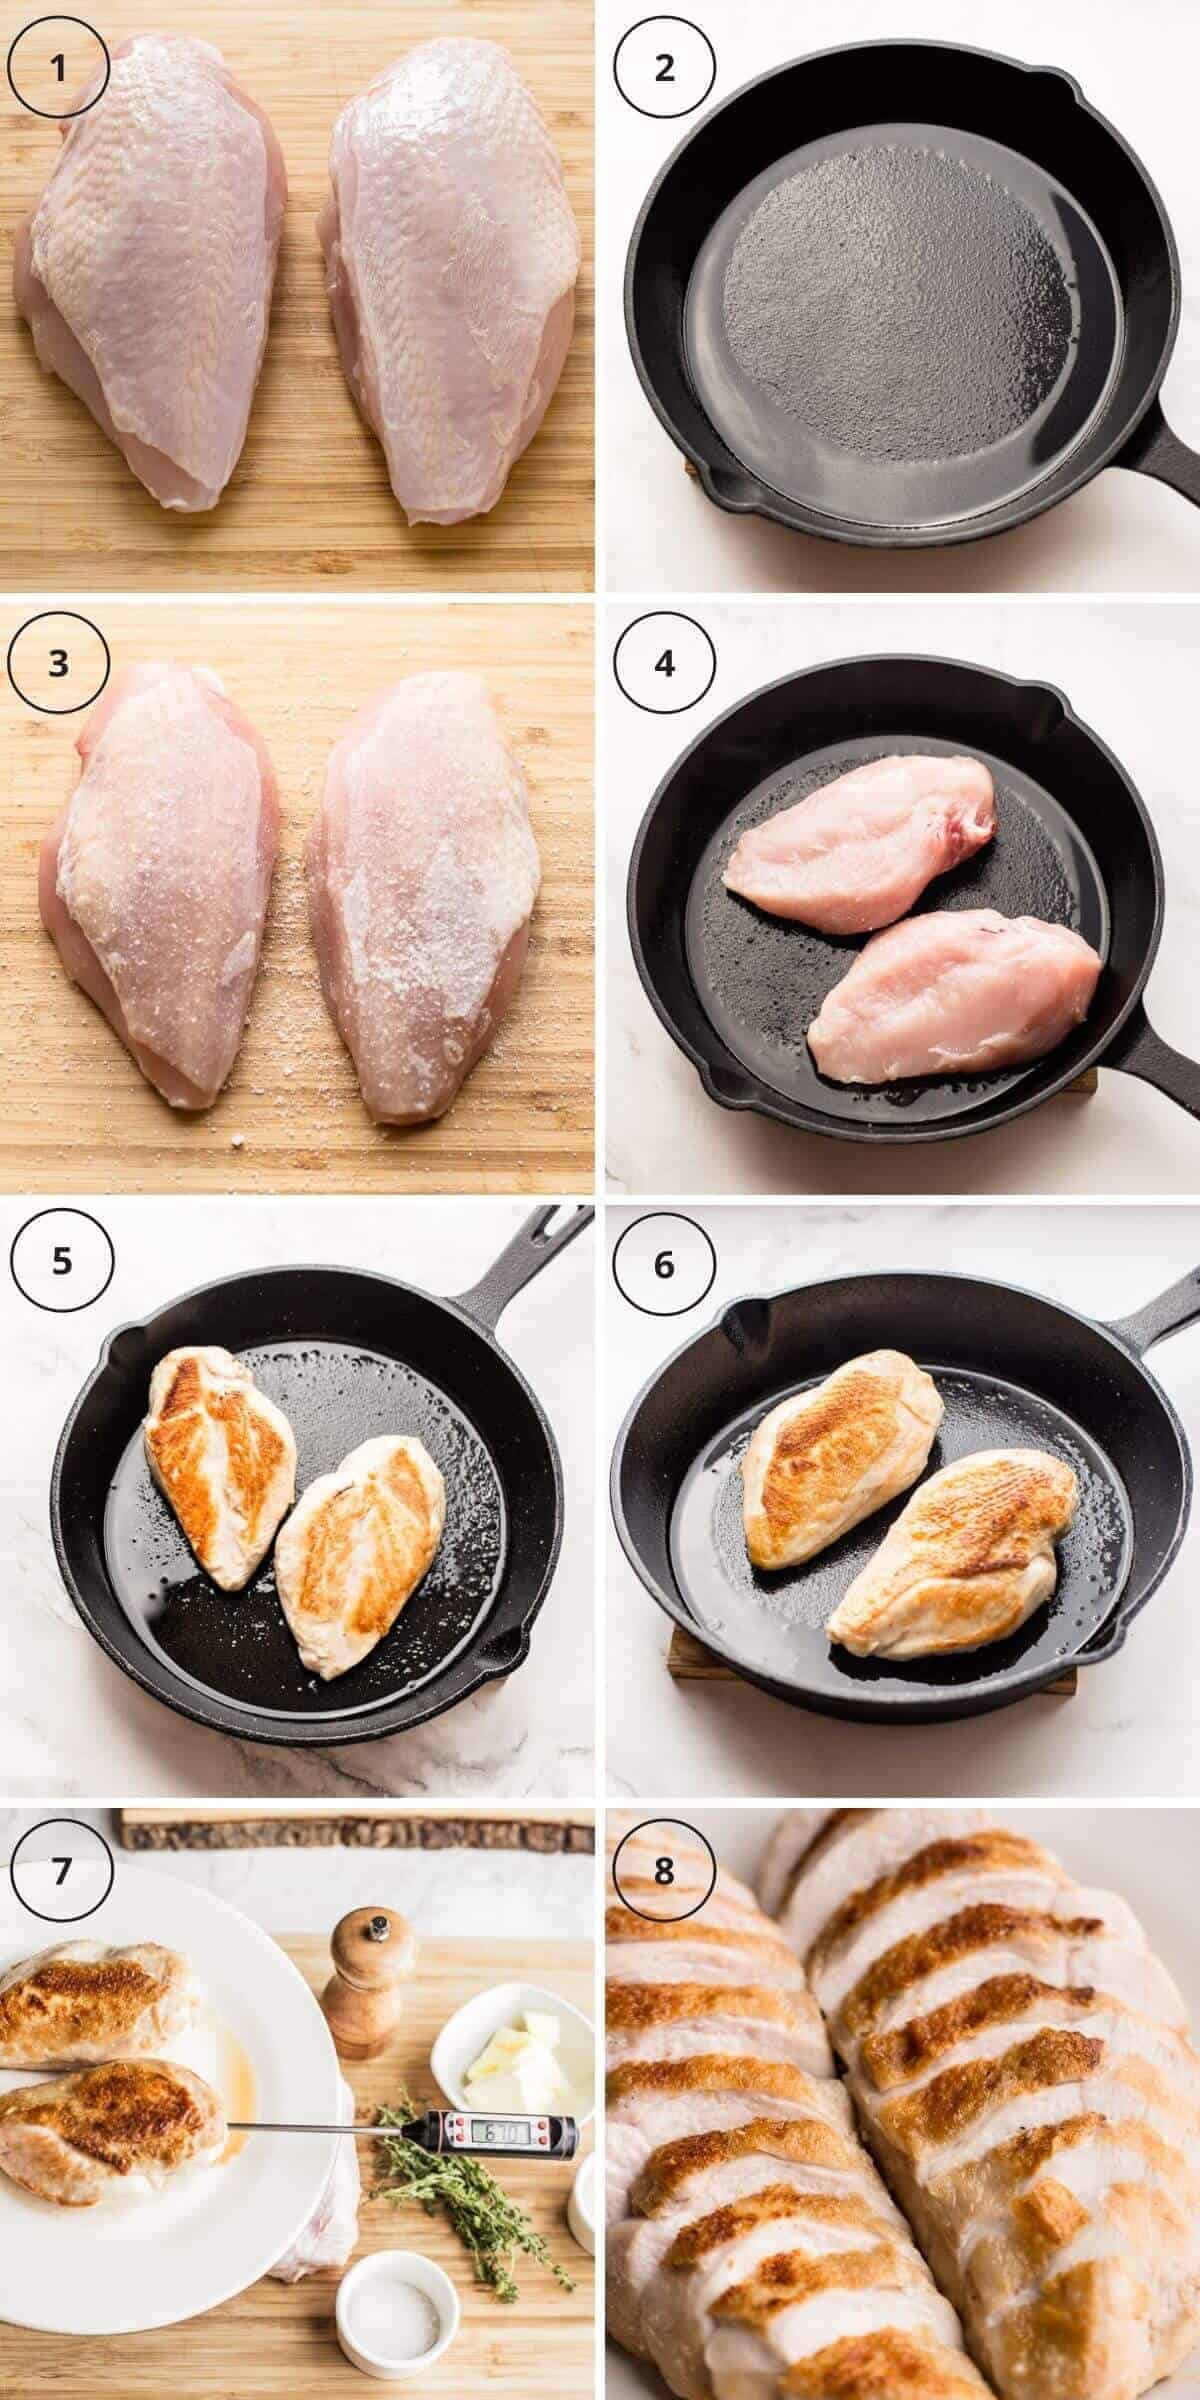 Simple 8 steps to perfect roasted chicken